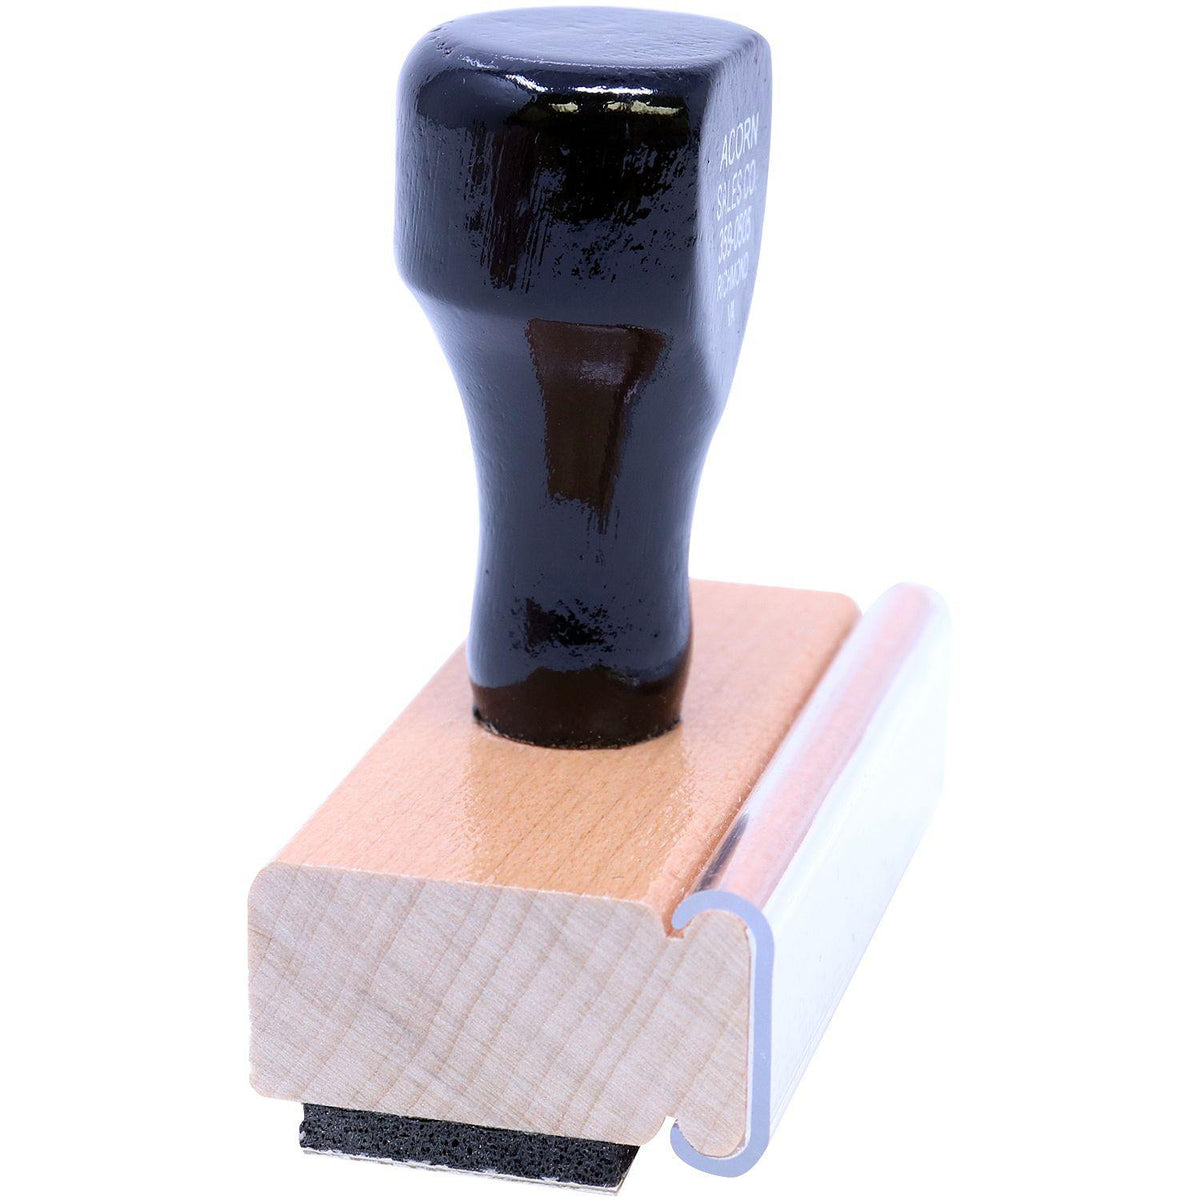 Large Special Handling Rubber Stamp - Engineer Seal Stamps - Brand_Acorn, Impression Size_Large, Stamp Type_Regular Stamp, Type of Use_Office, Type of Use_Postal